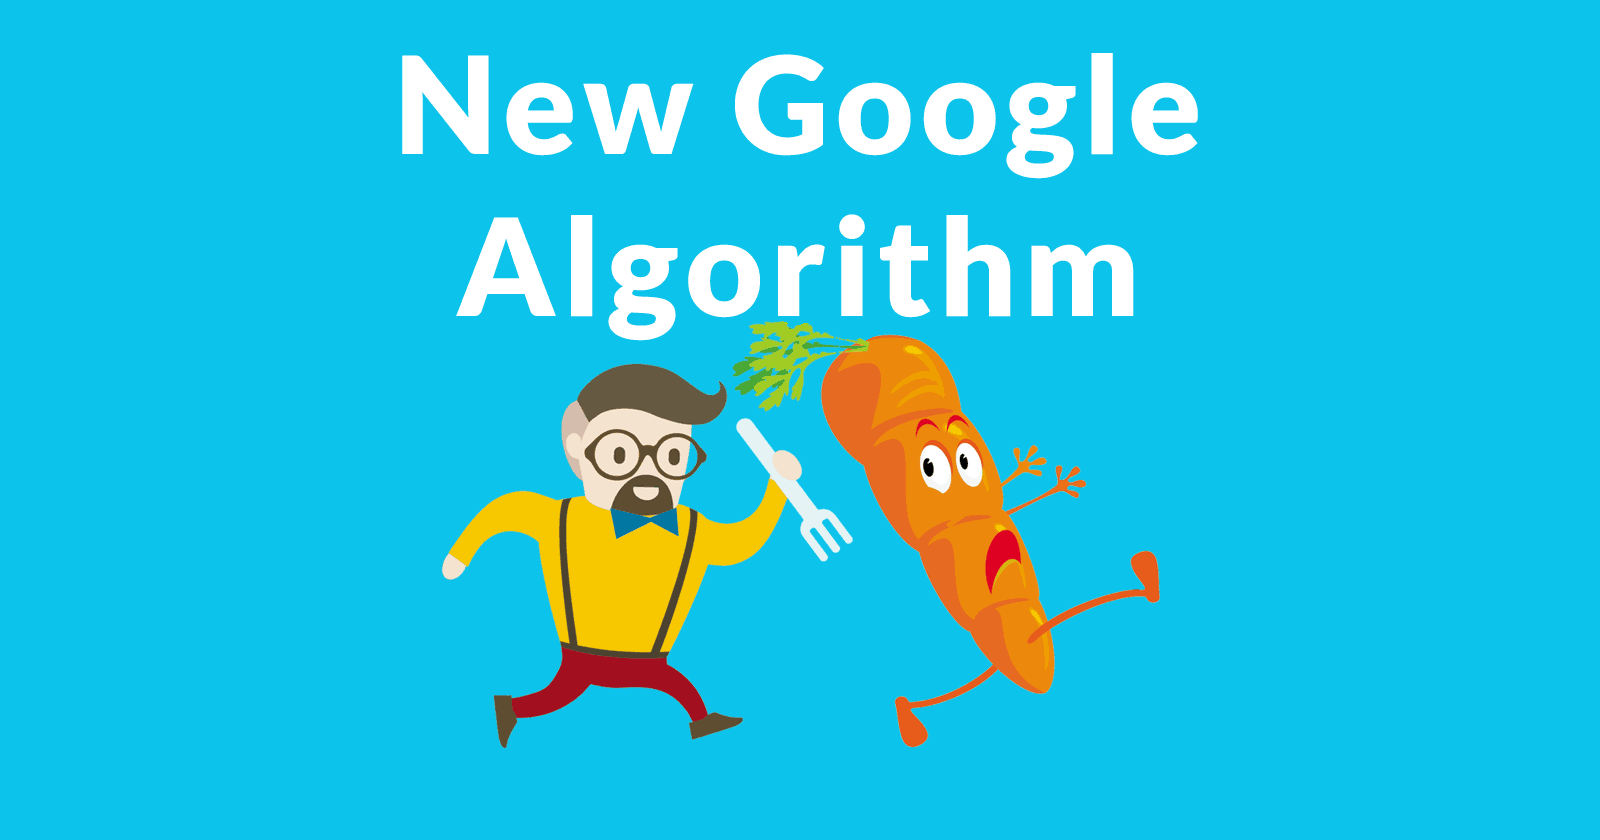 Image of a man chasing a carrot. The carrot is a symbol of a reward. The words "New Google Algorithm" are written above the image.